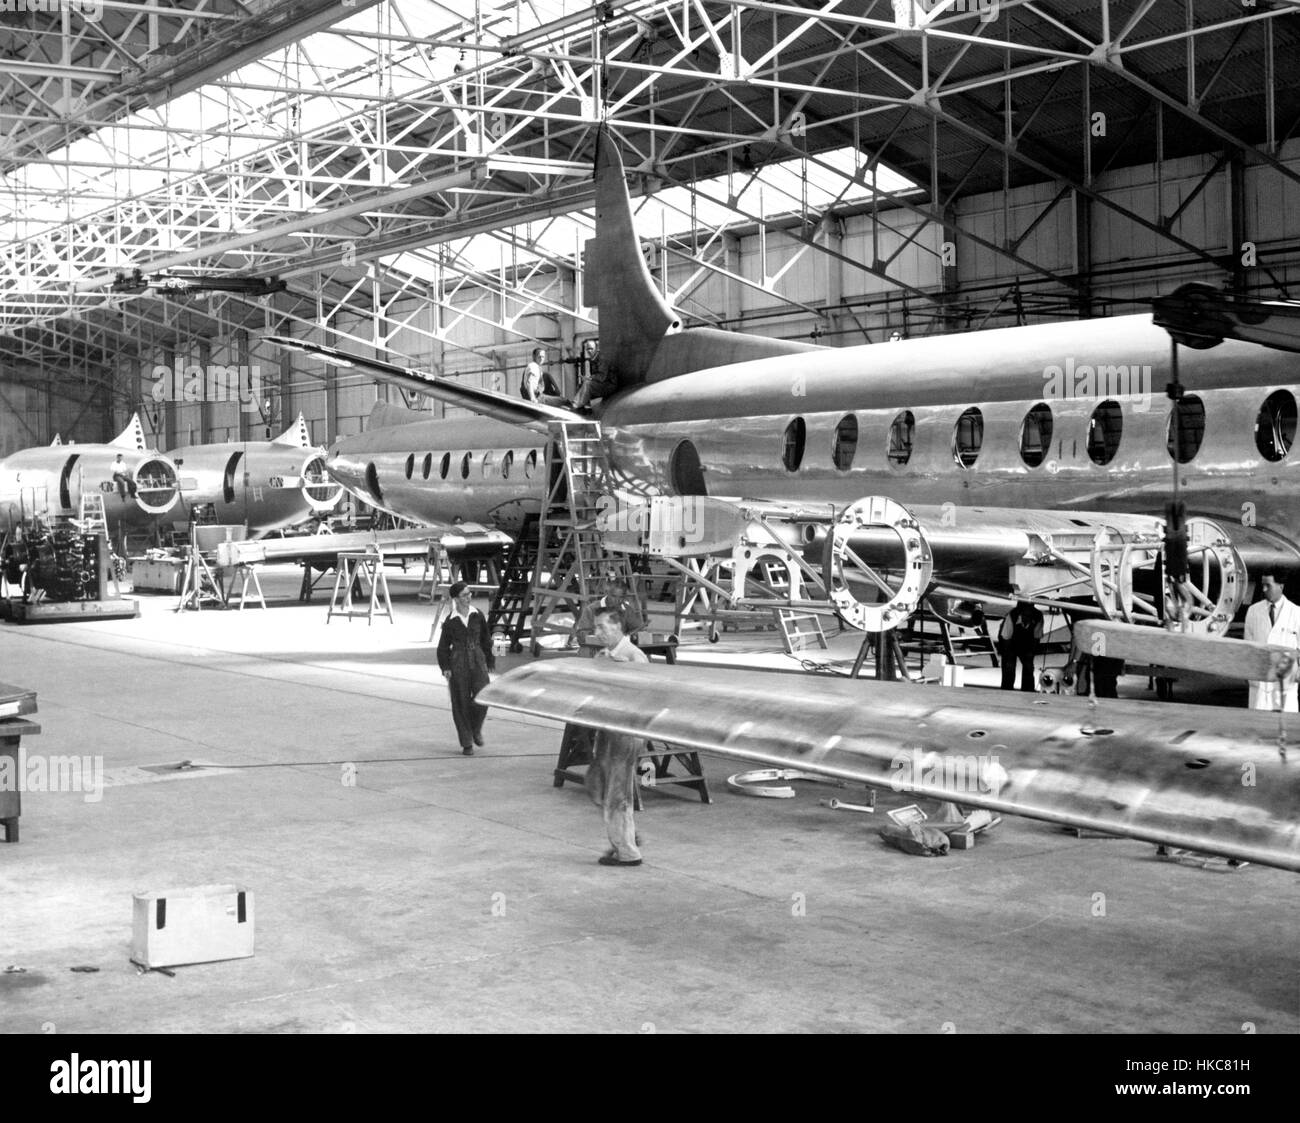 Vickers-Armstrong Viscount under construction in an Aircraft factory UK Stock Photo